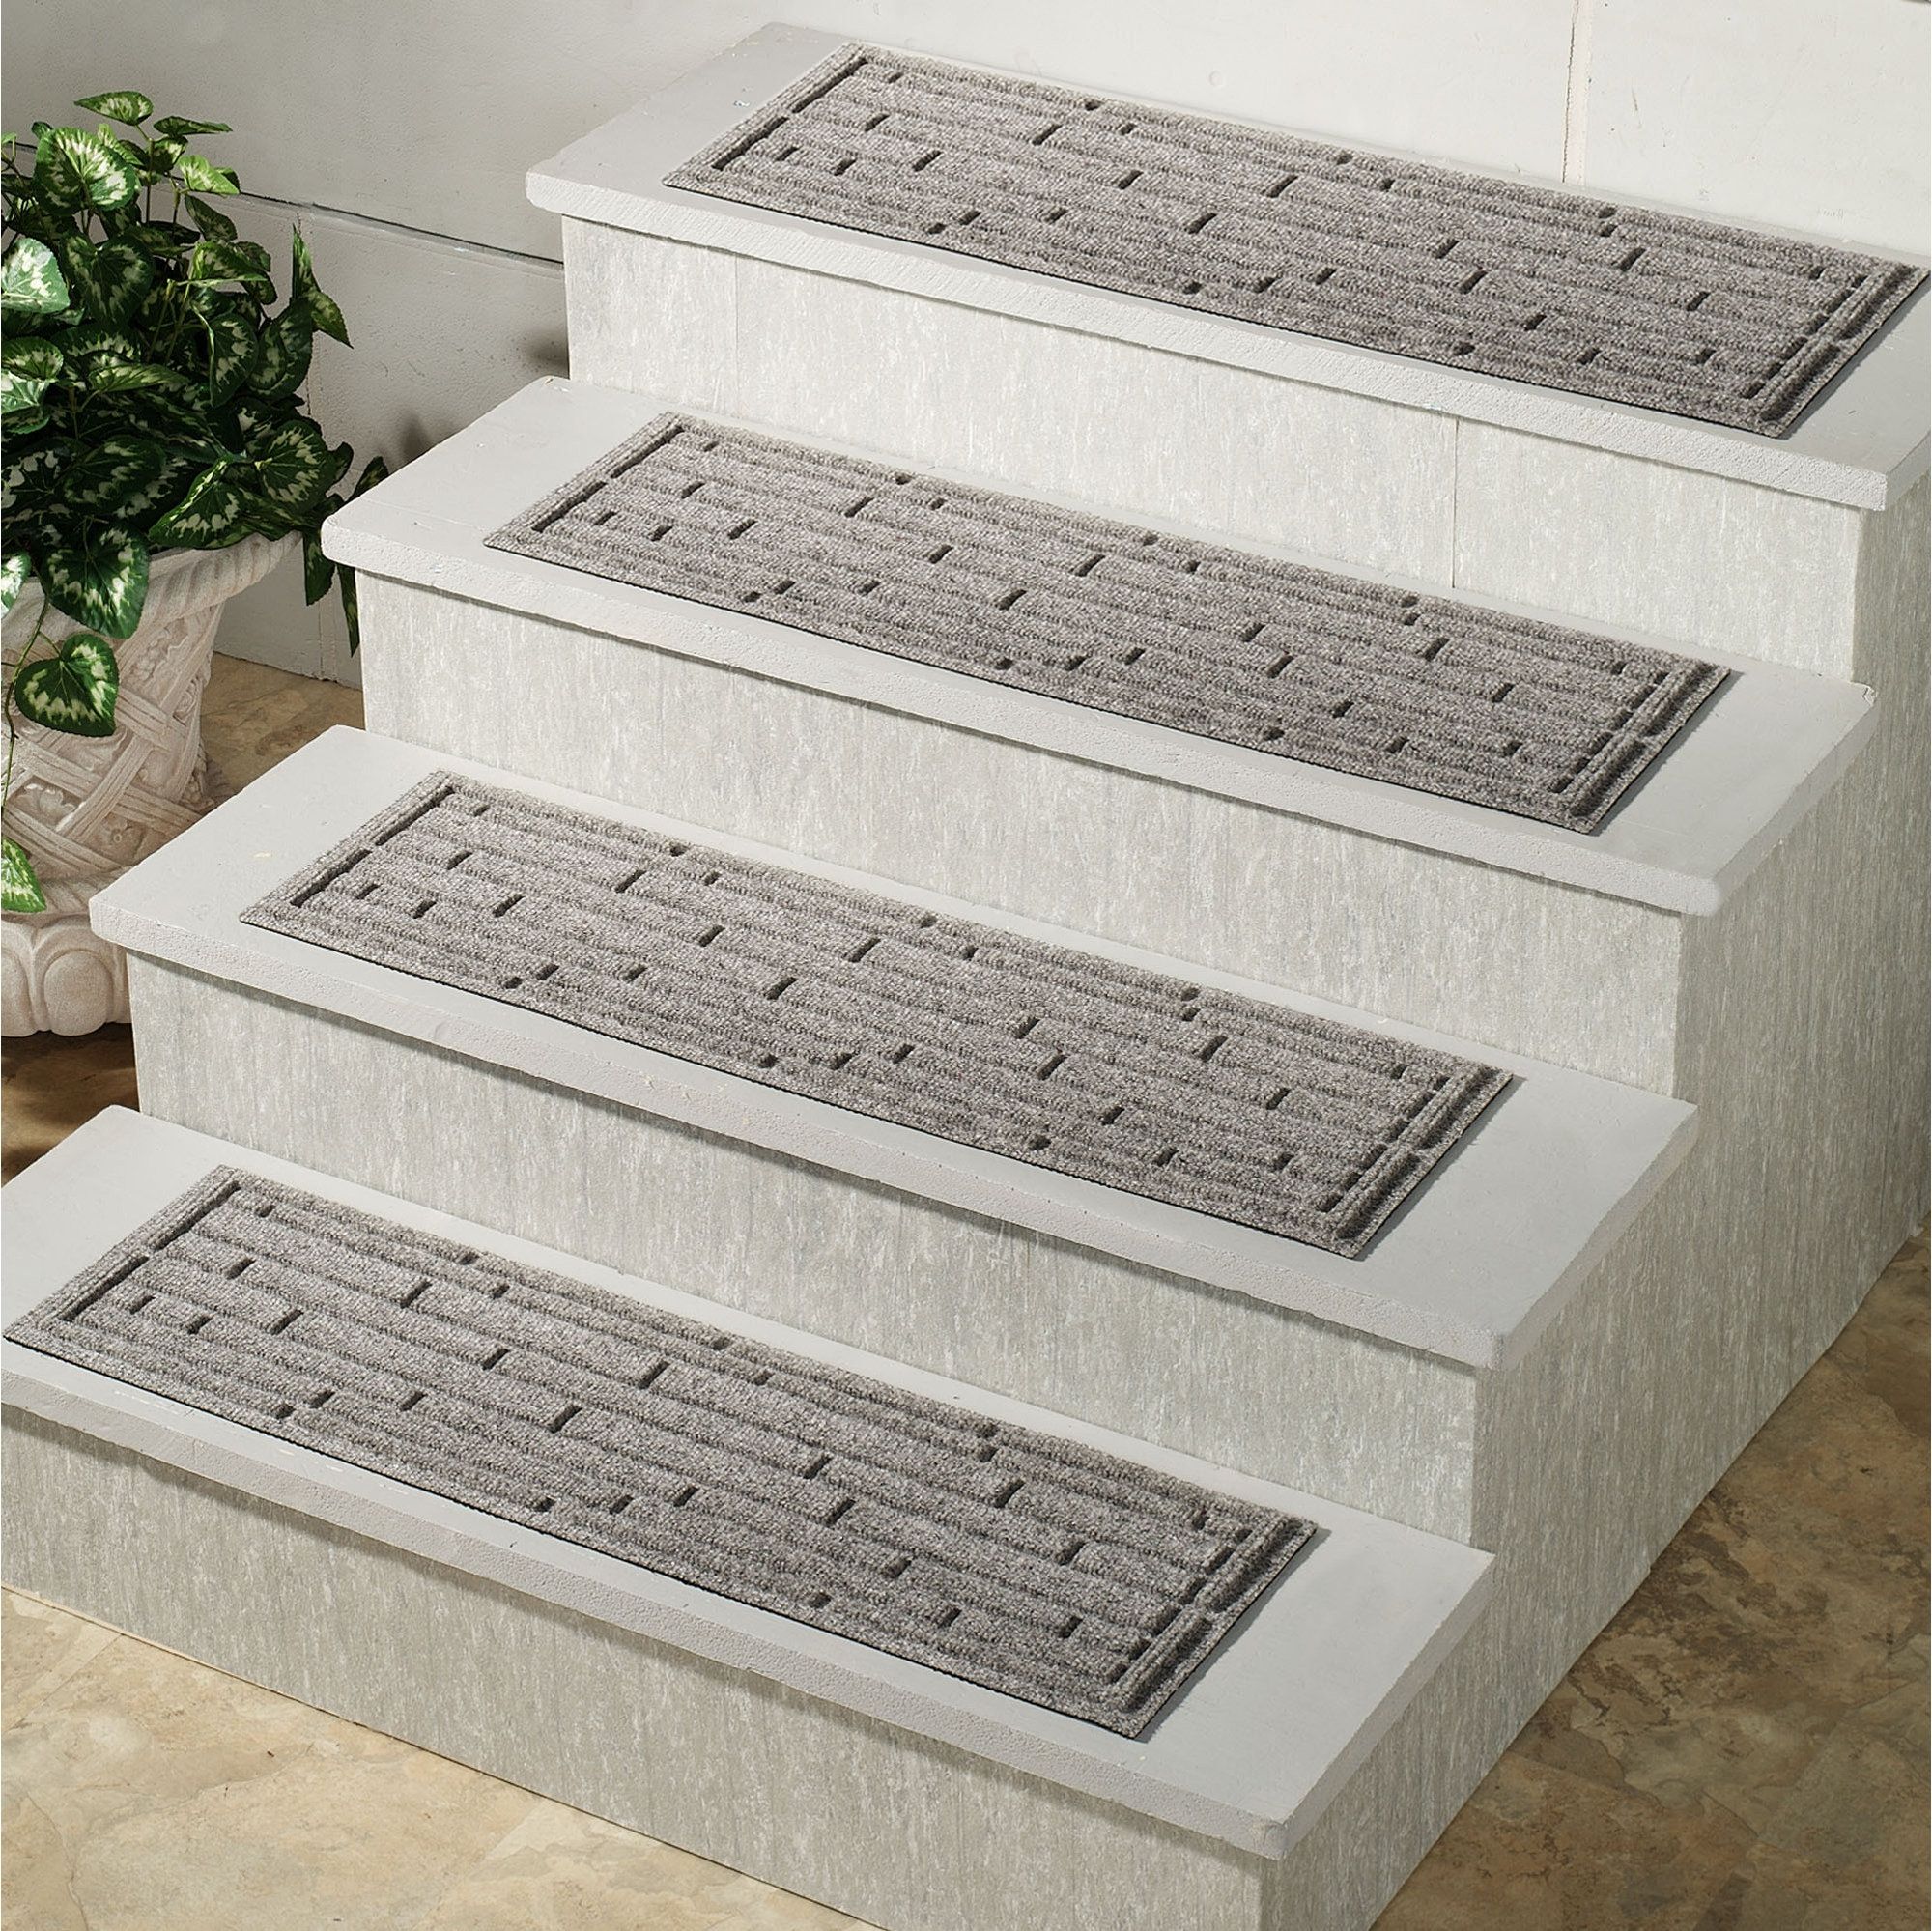 Exterior Interesting Stair Treads For Interior And Exterior With Regard To Stair Tread Carpet Tiles (View 11 of 20)